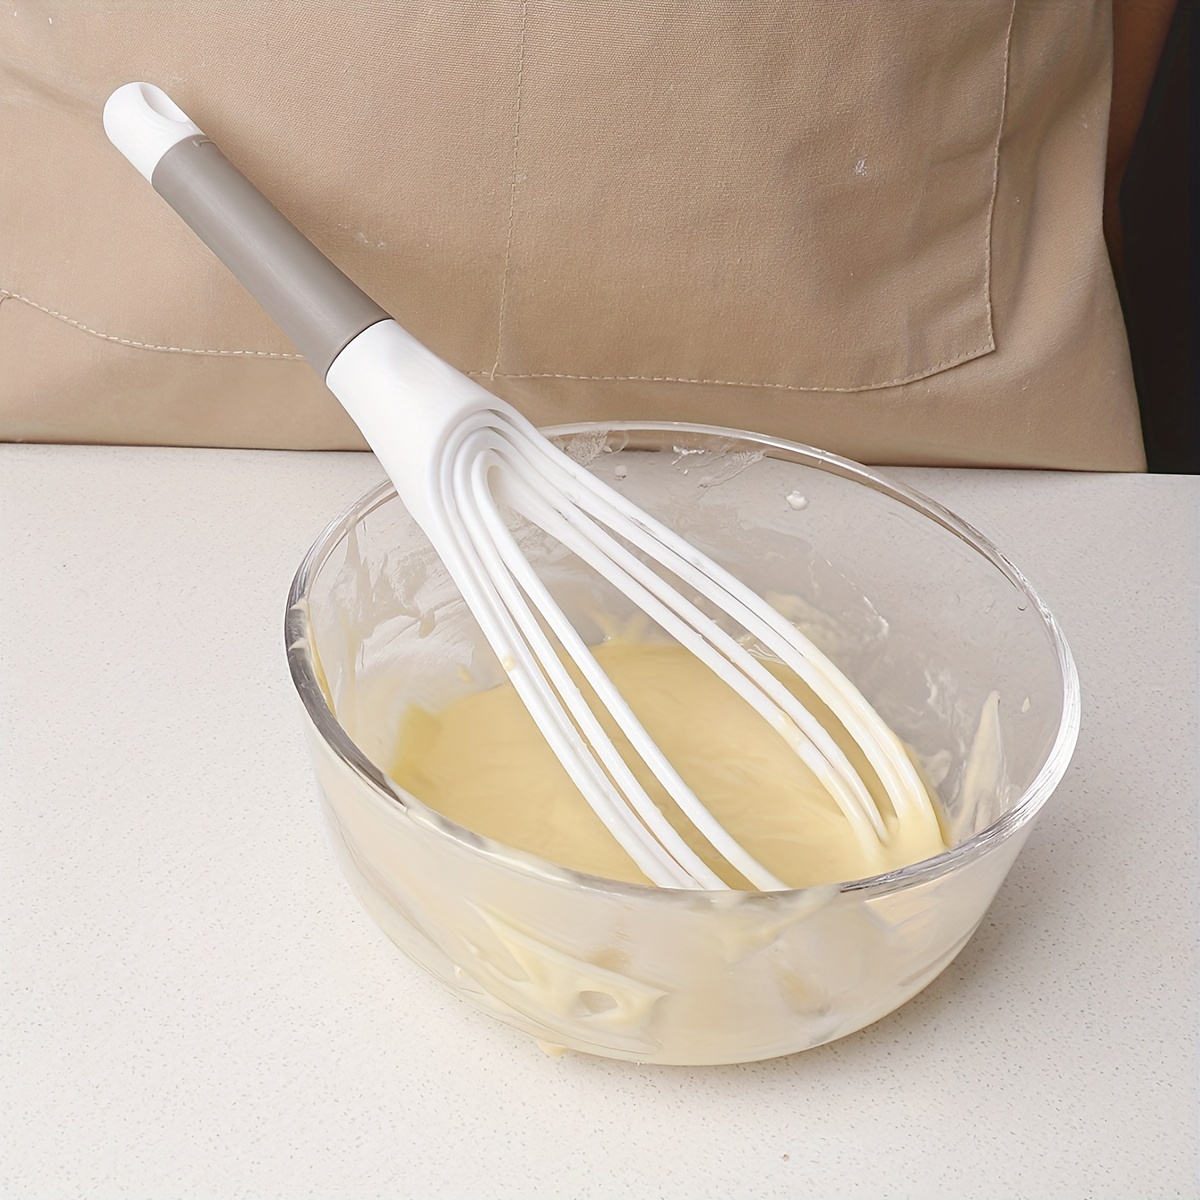 Whisk 2-In-1 Collapsible Balloon and Flat Whisk Silicone Coated